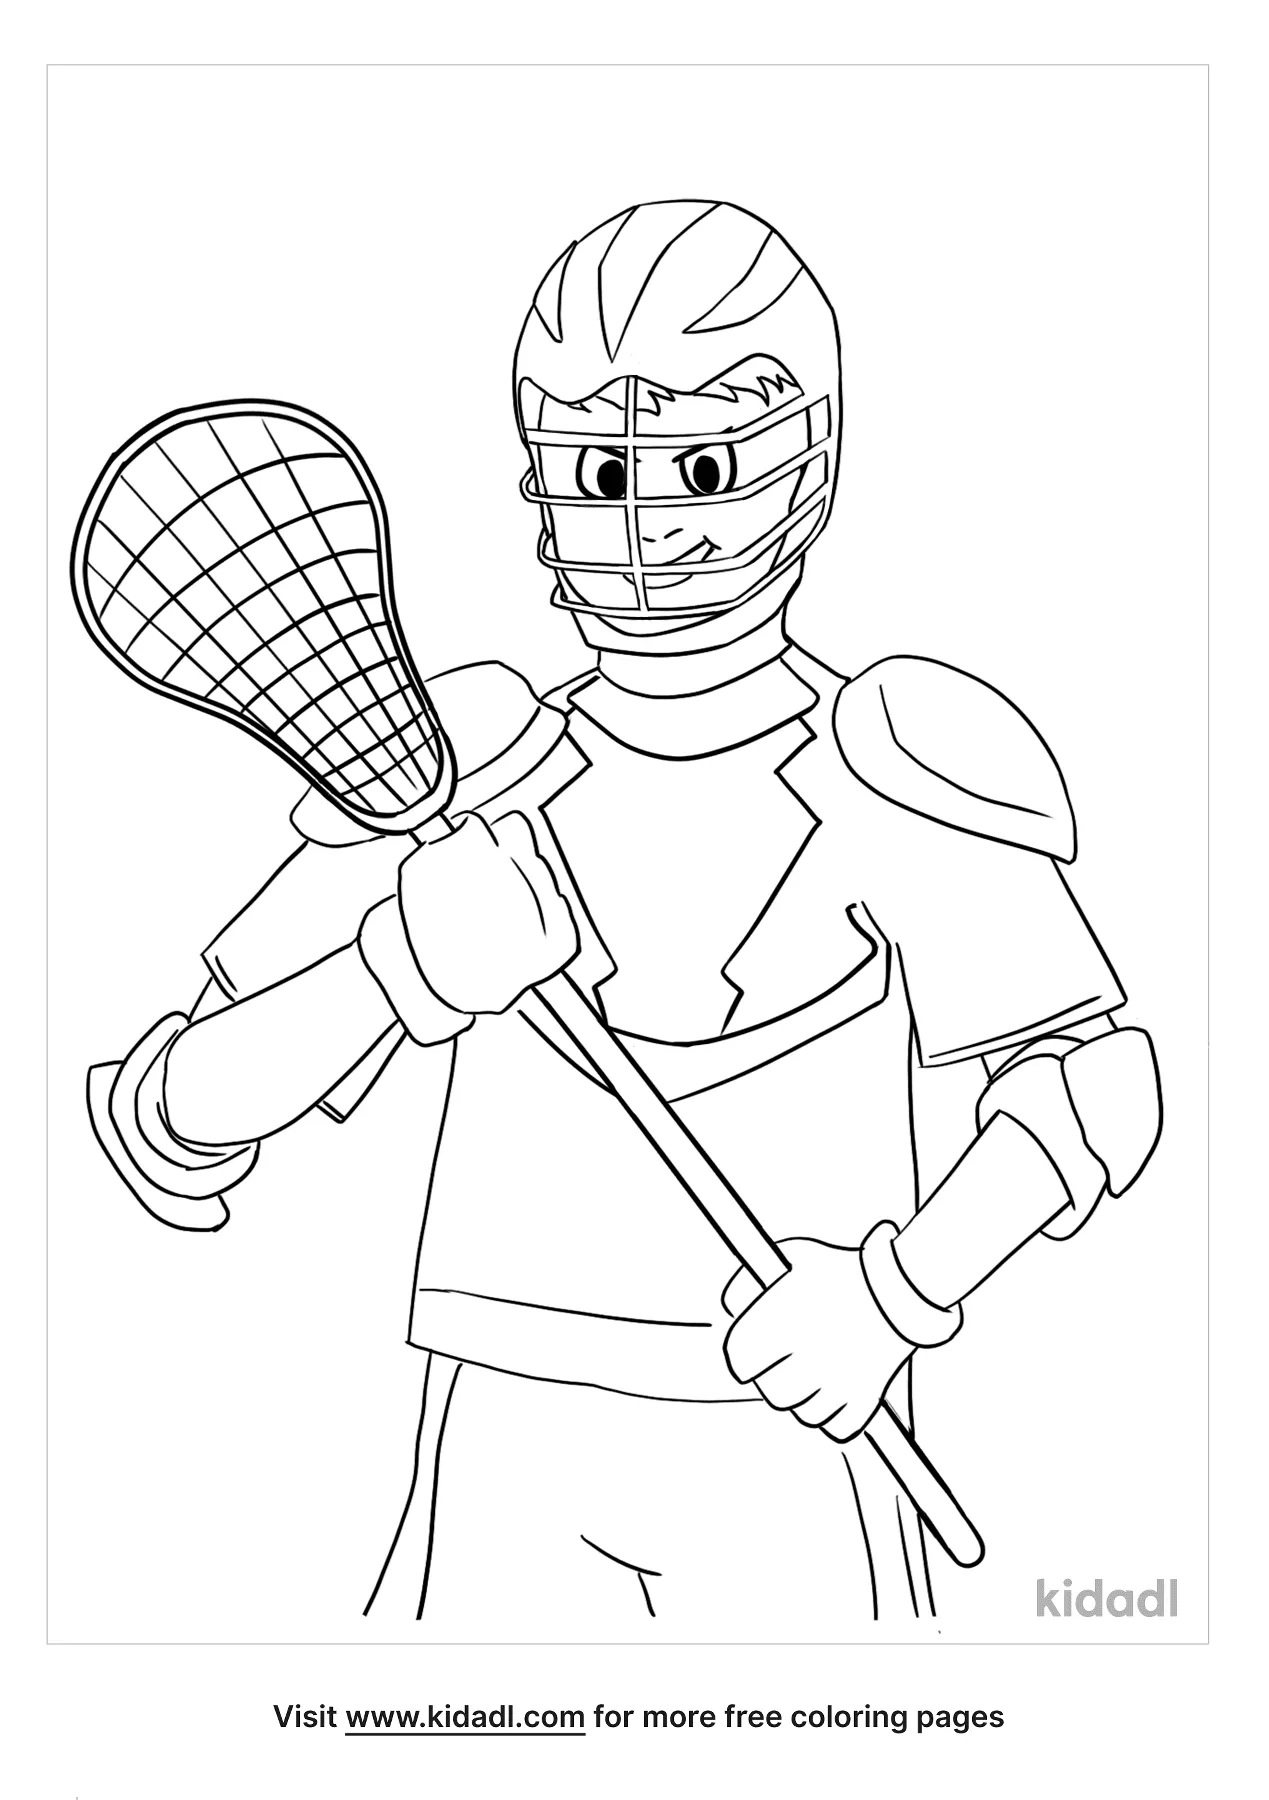 Free lacrosse coloring page coloring page printables